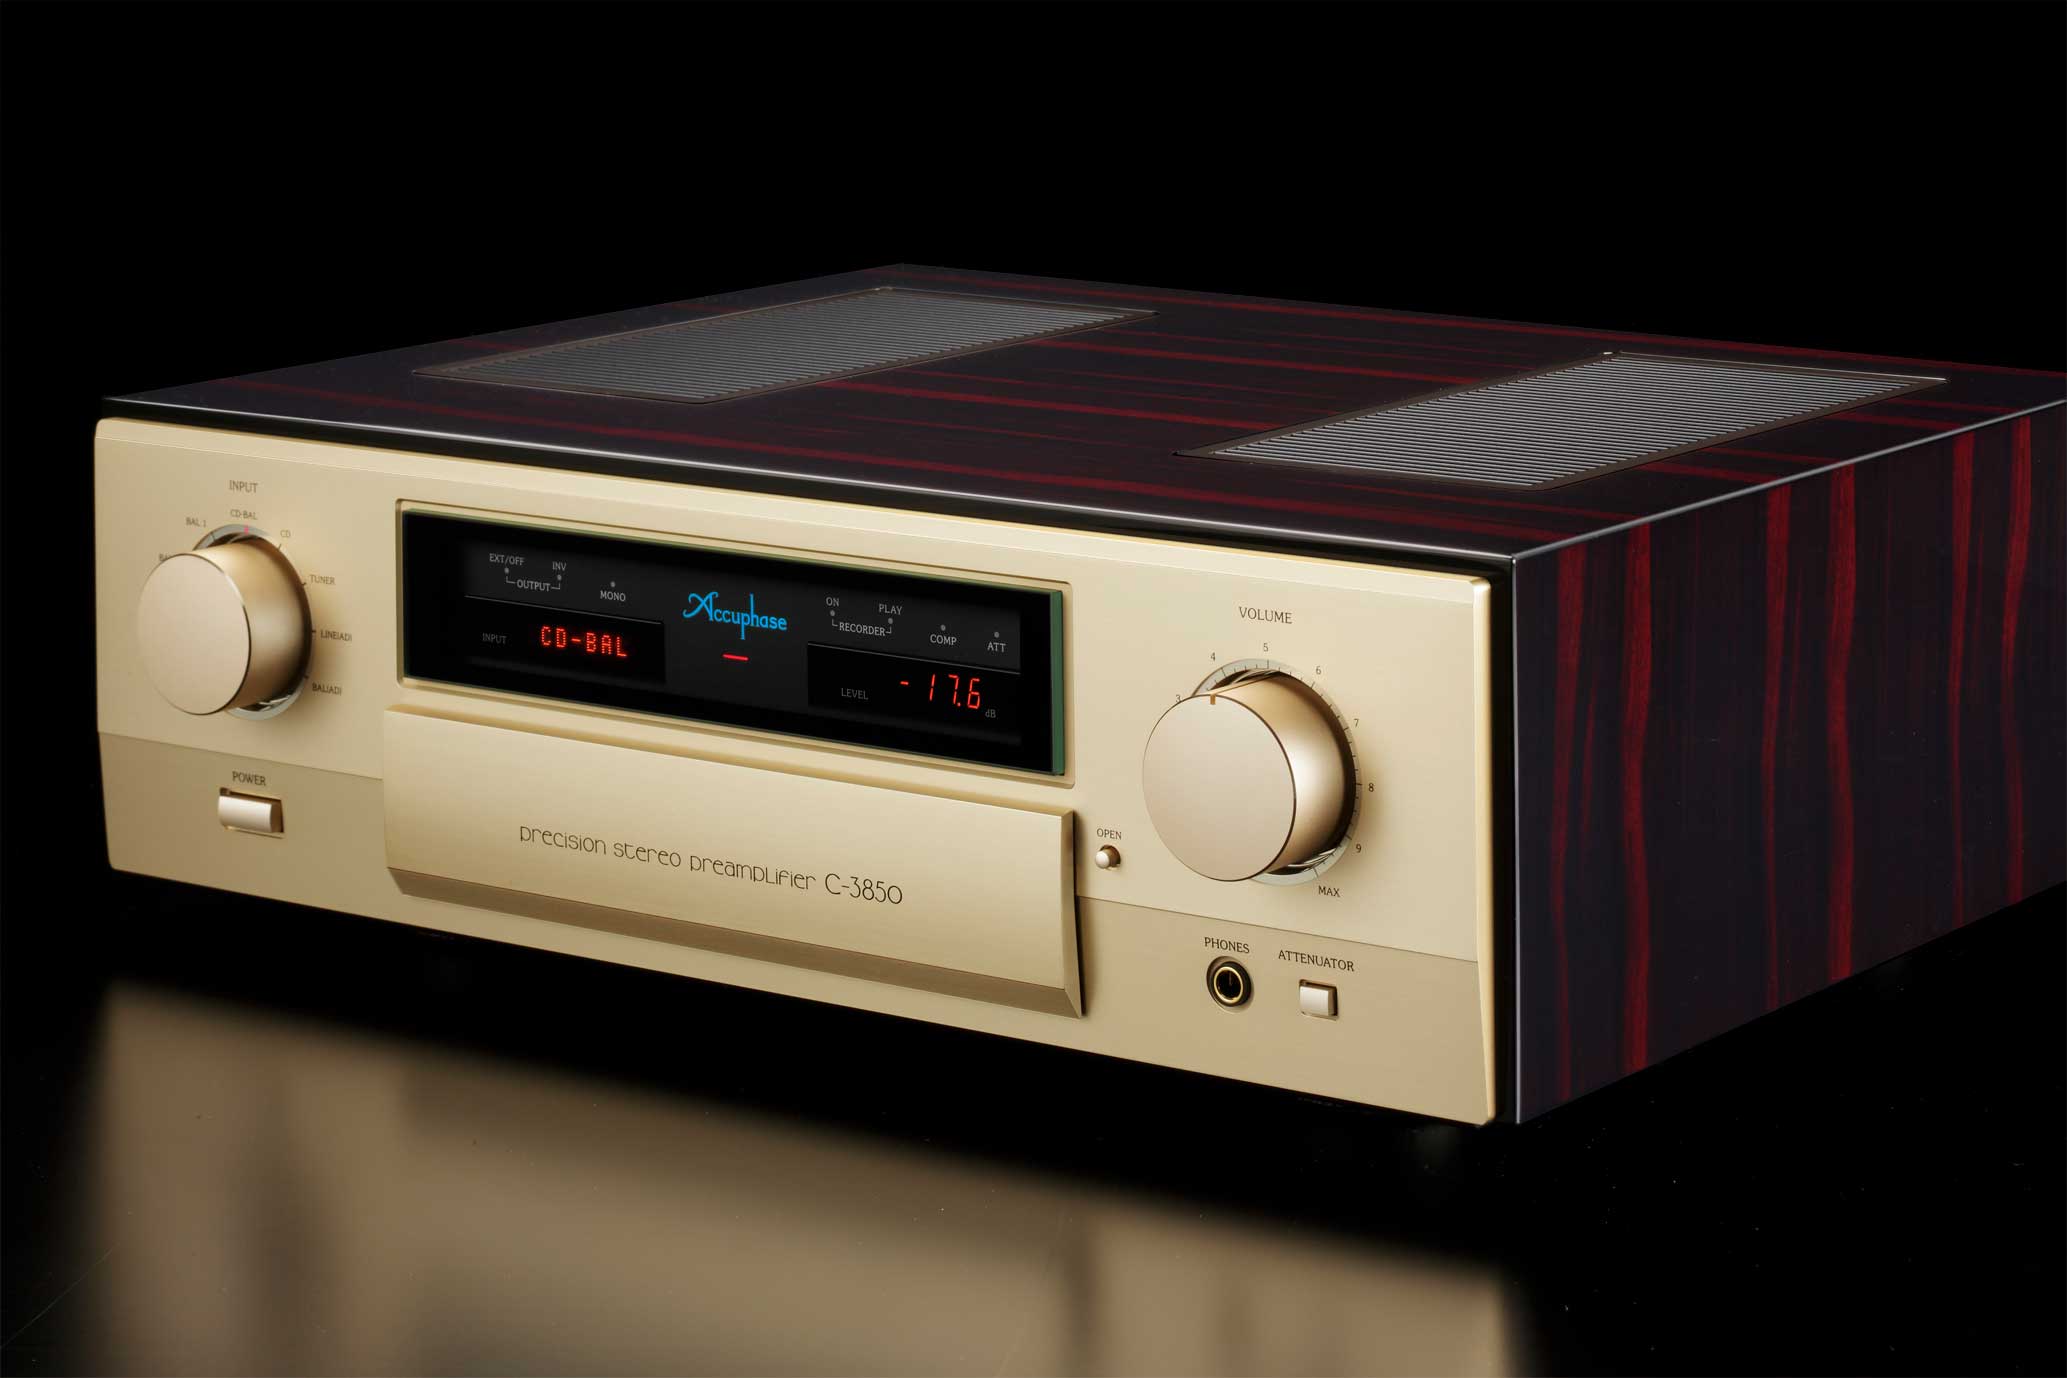 Pre Ampli Accuphase C-3850 | Anh Duy Audio